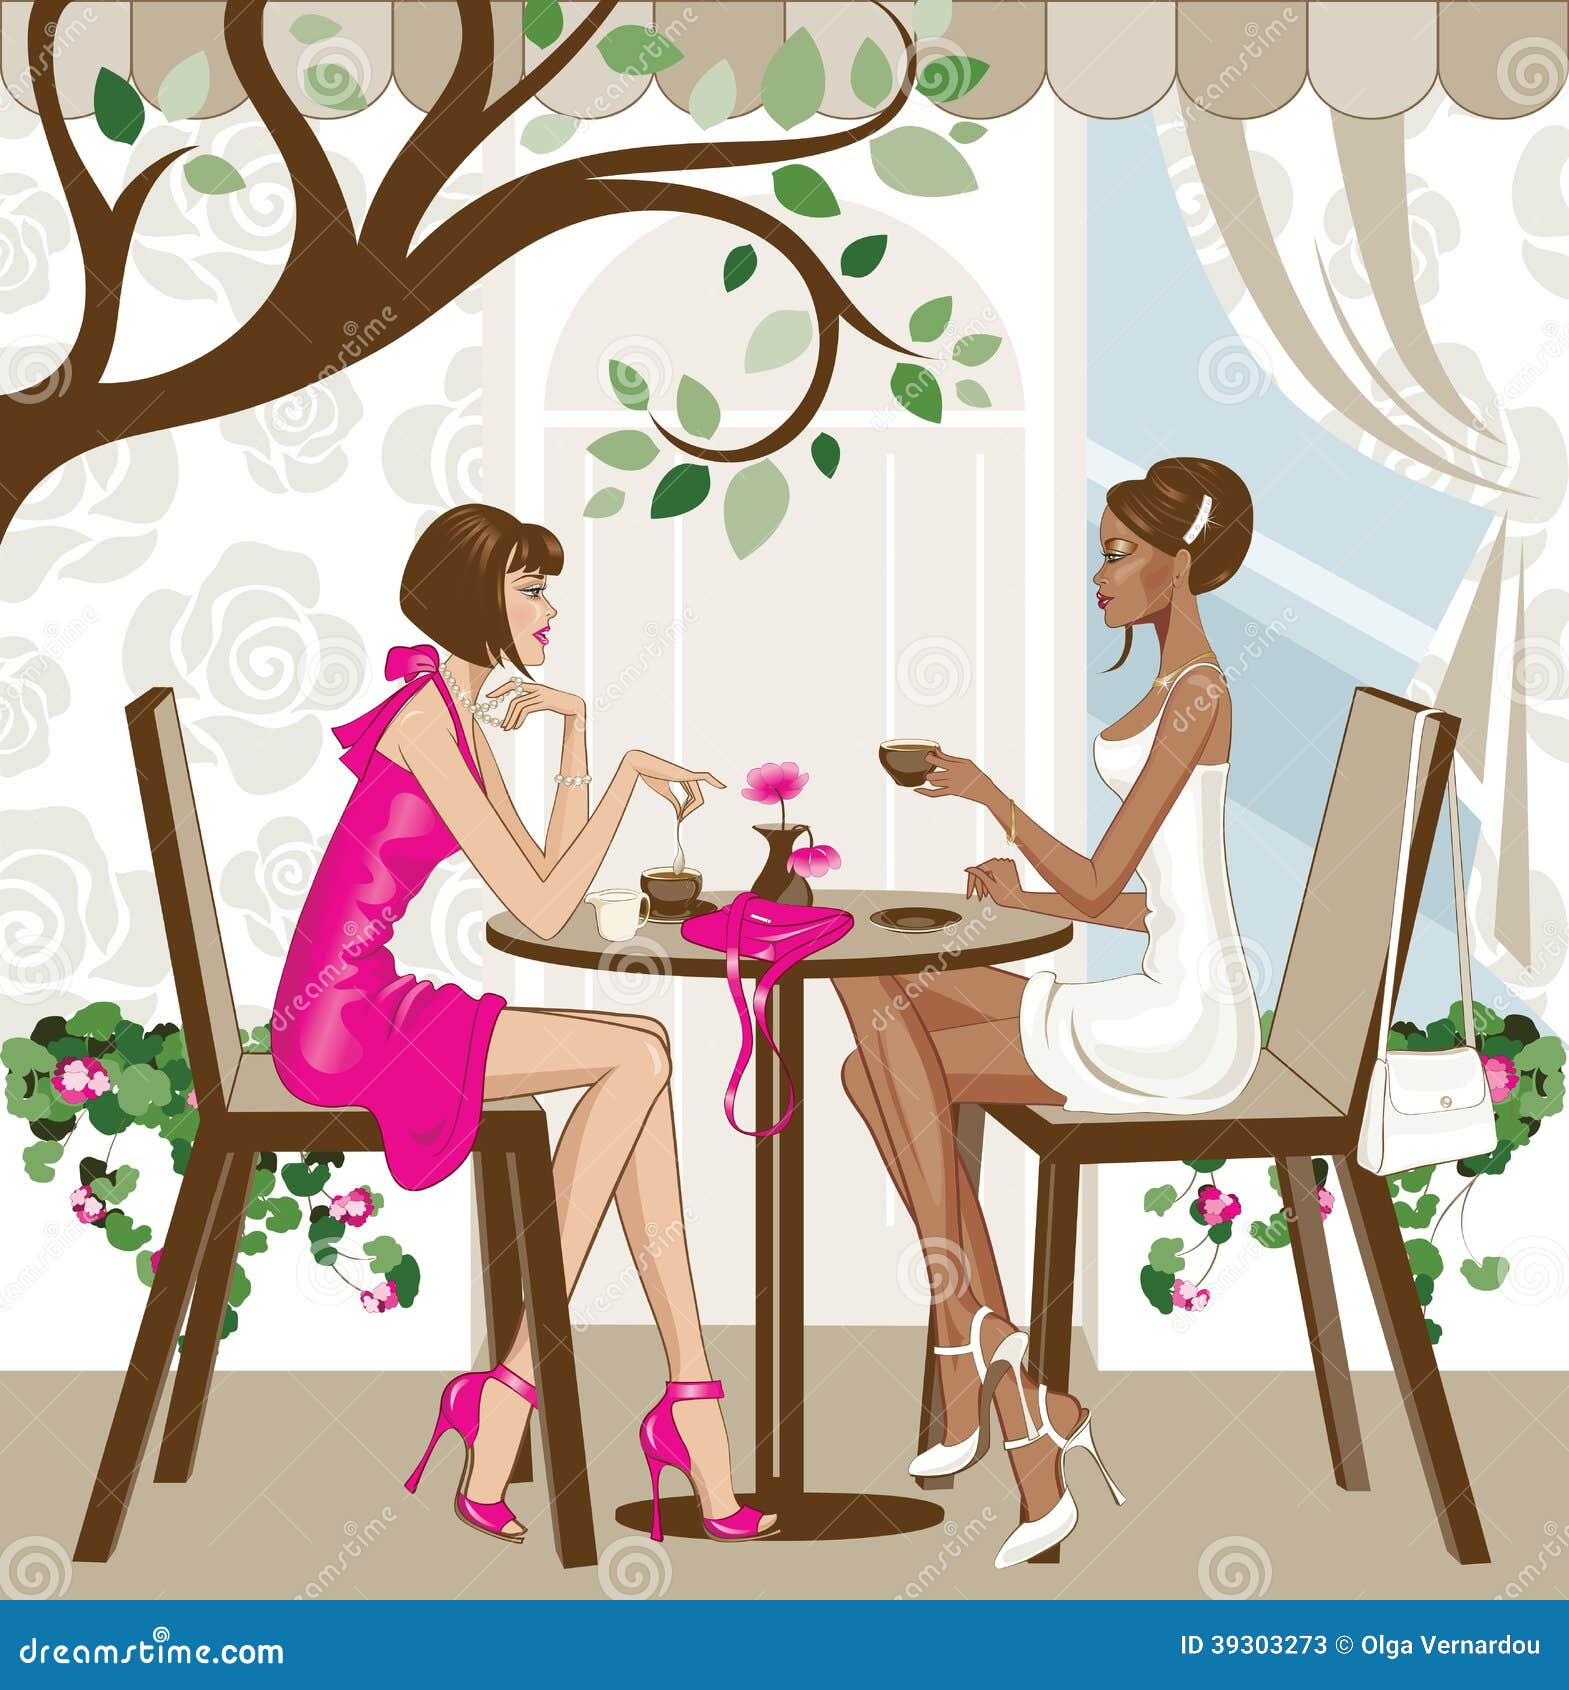 clipart of lady drinking coffee - photo #24